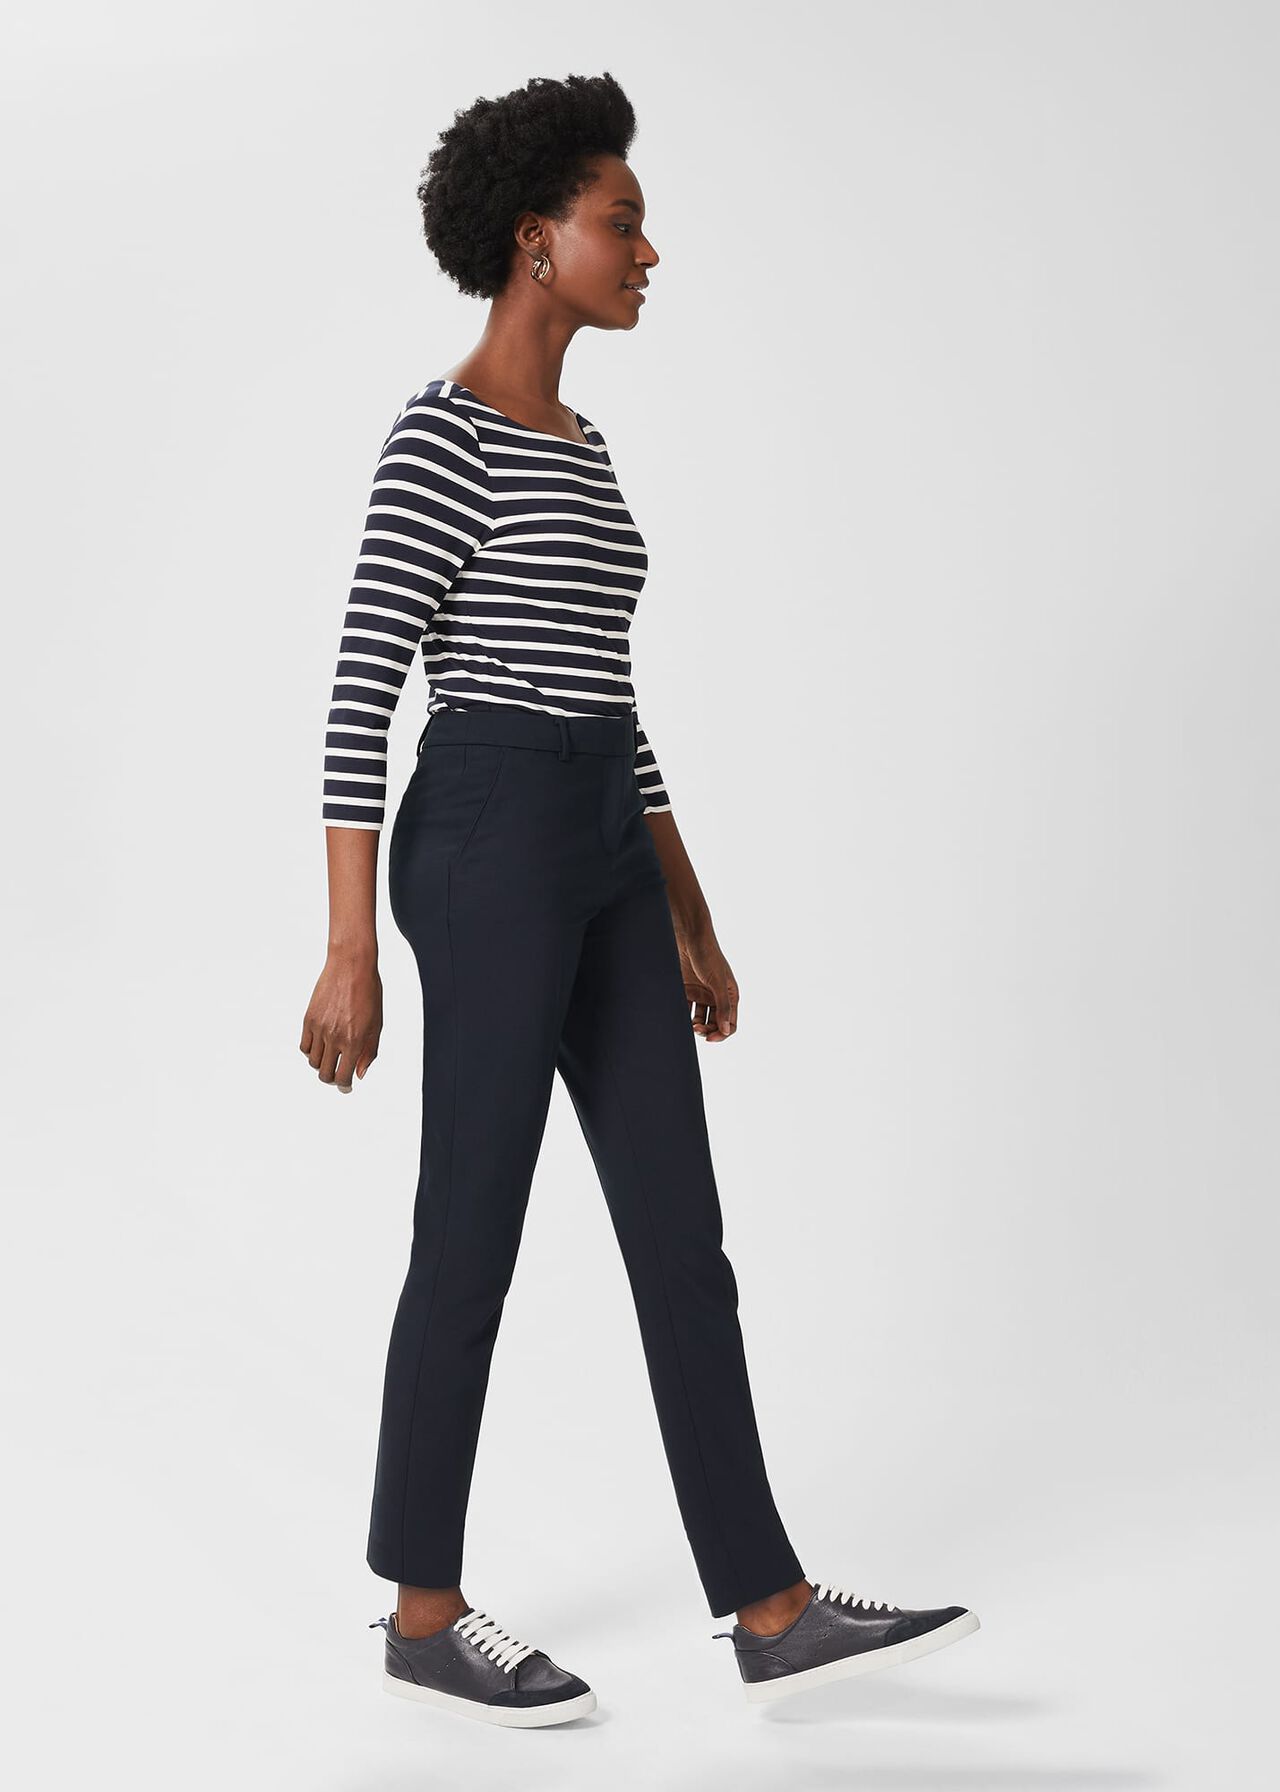 Quin Tapered Pants, Navy, hi-res